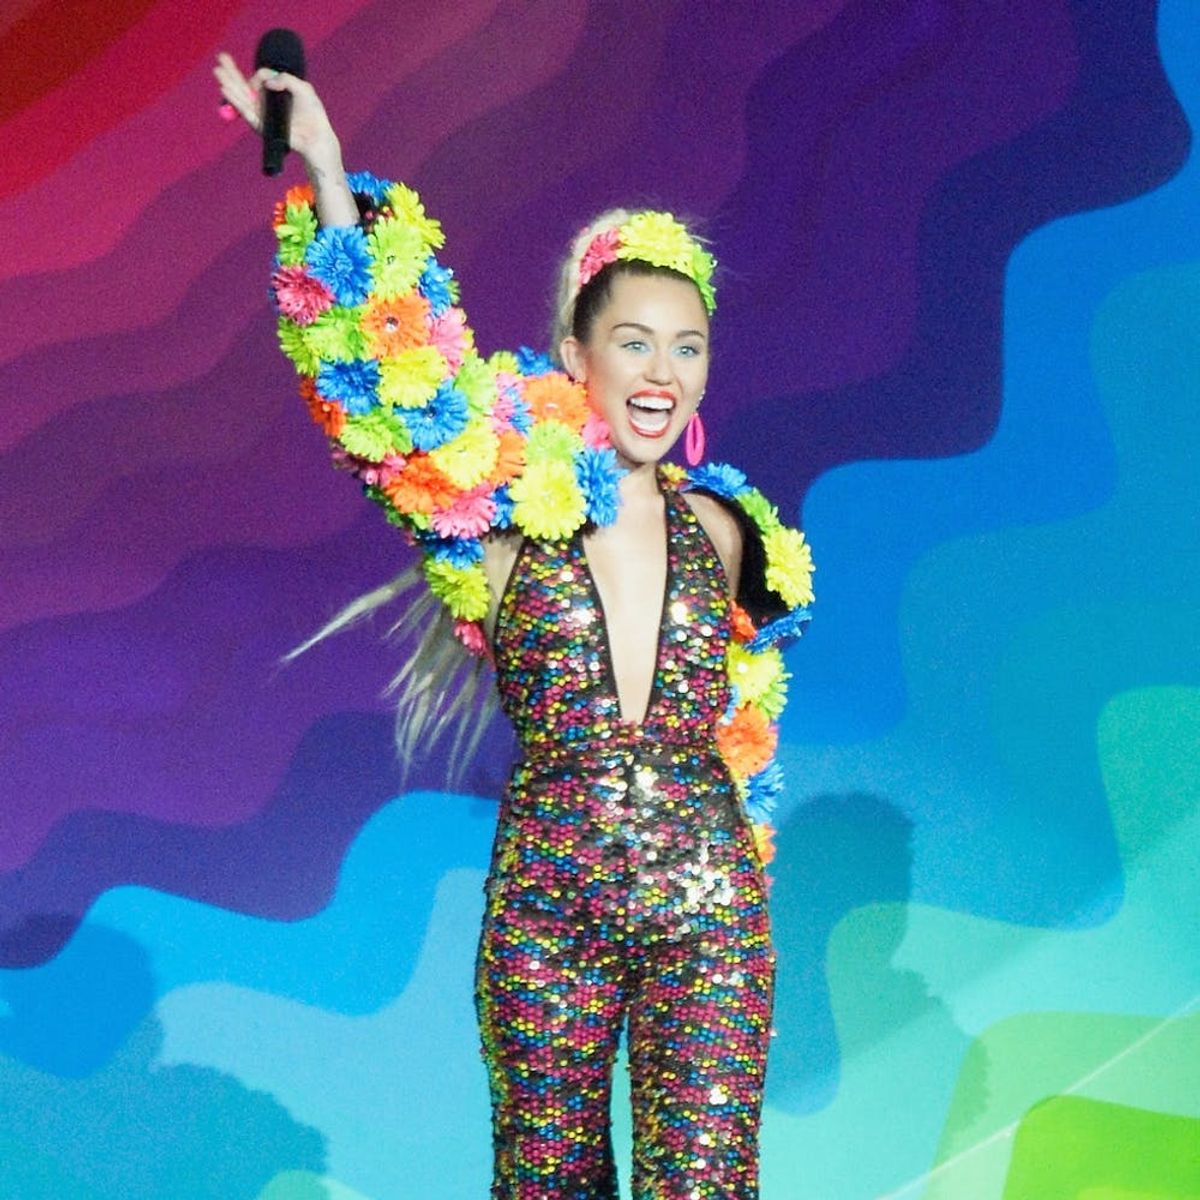 7 Ways to Turn Miley Cyrus’ Craziest VMAs Looks into Your Halloween Costume